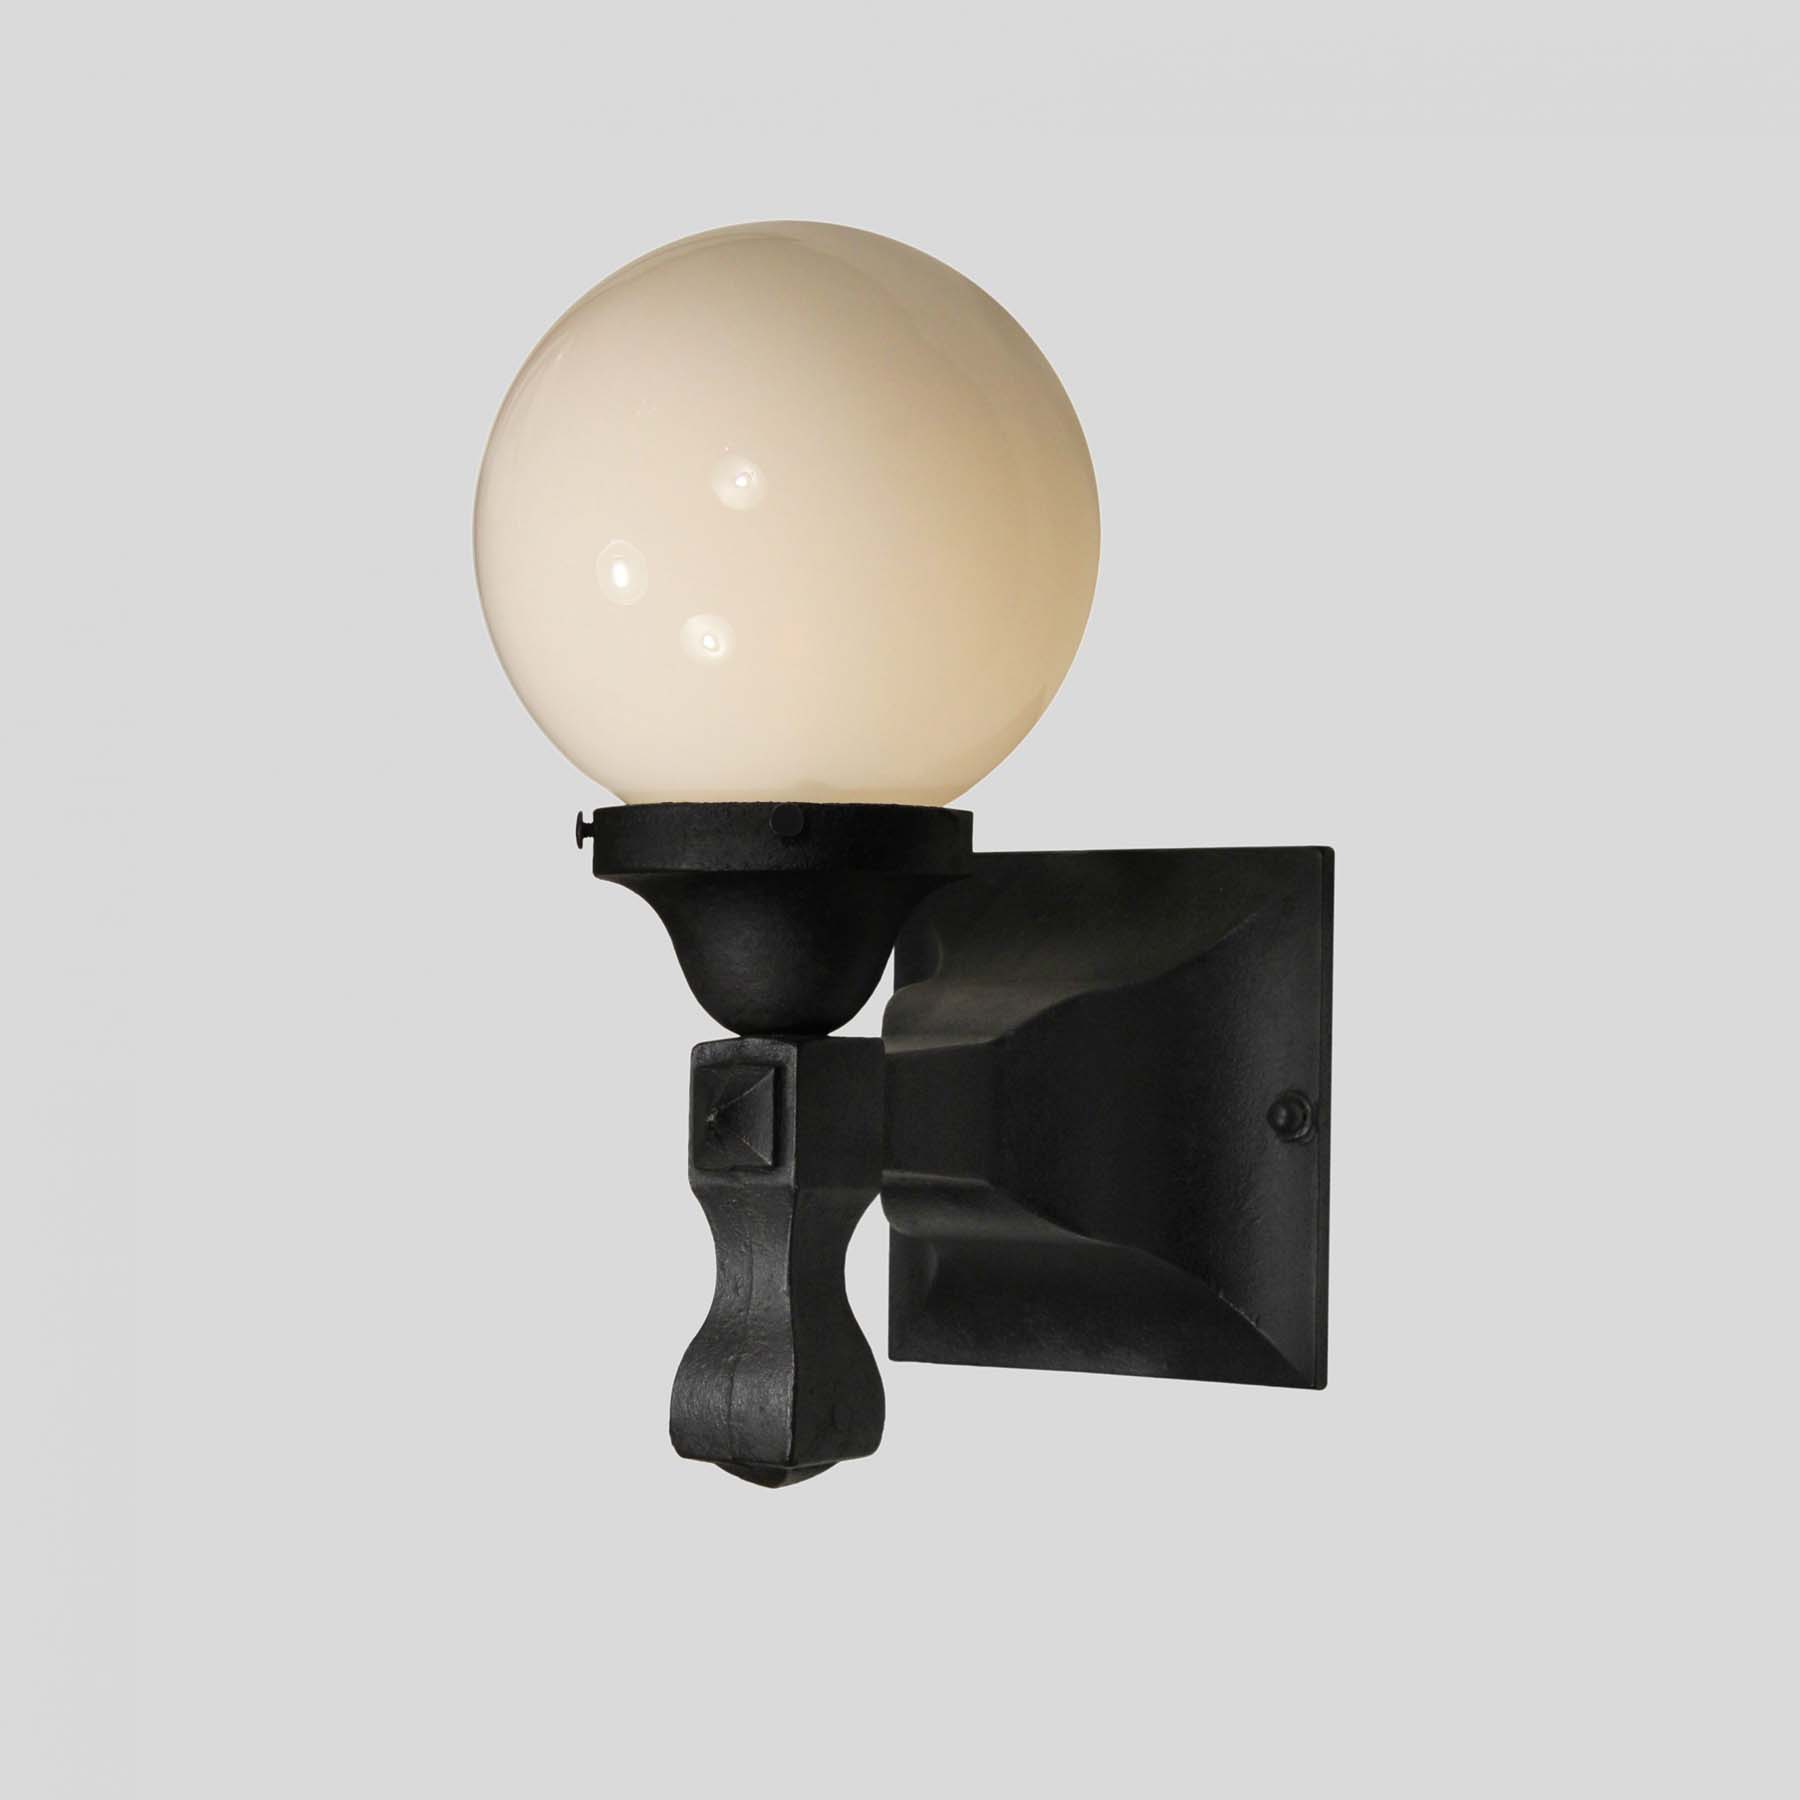 Pair of Antique Exterior Sconces with Glass Globes-70686